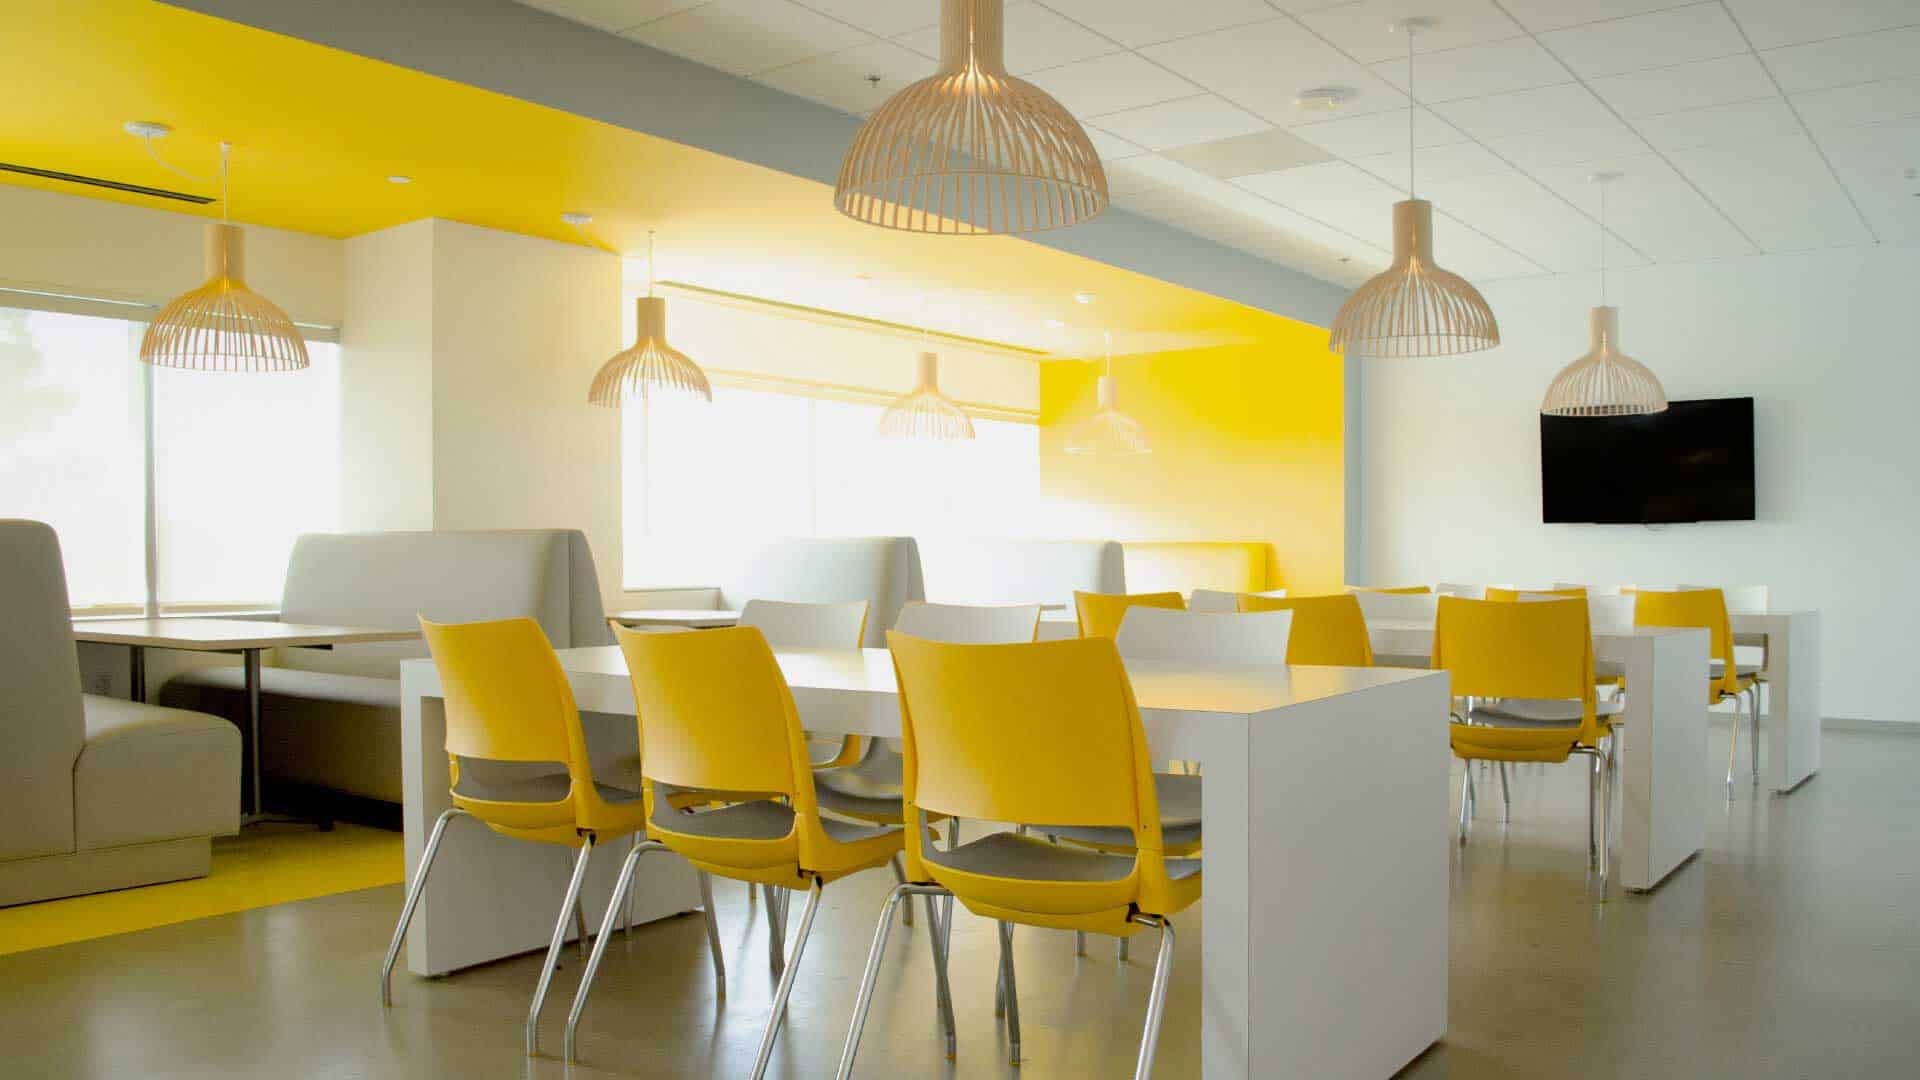 Brightly Colored Open Office Space with Yellow Chairs and White Tables